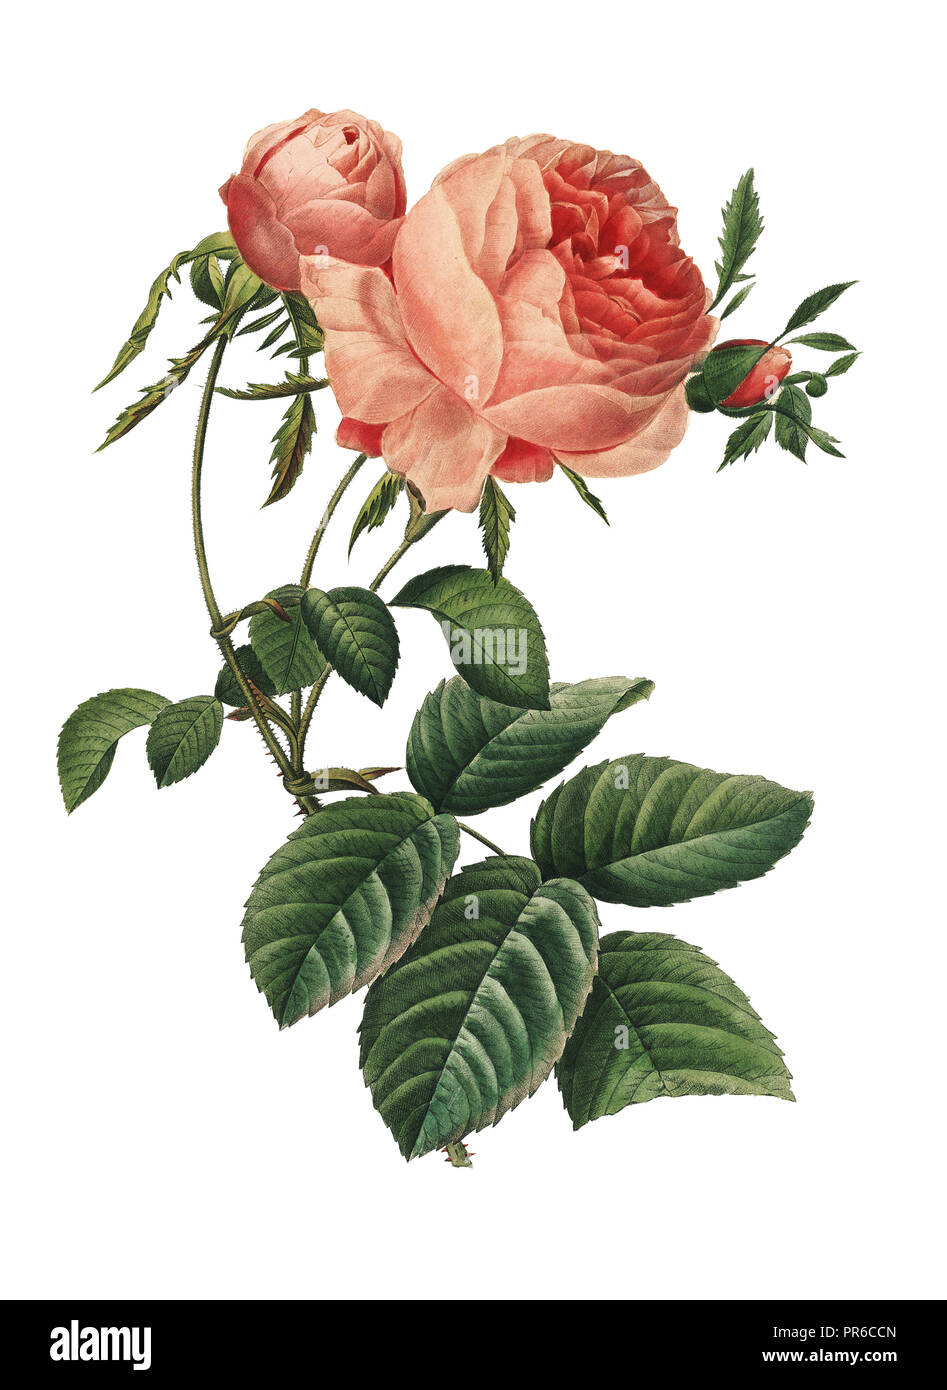 19th-century illustration of a Rosa centifolia  or hundred leaved rose. Engraving by Pierre-Joseph Redoute. Published in Choix Des Plus Belles Fleurs, Stock Photo